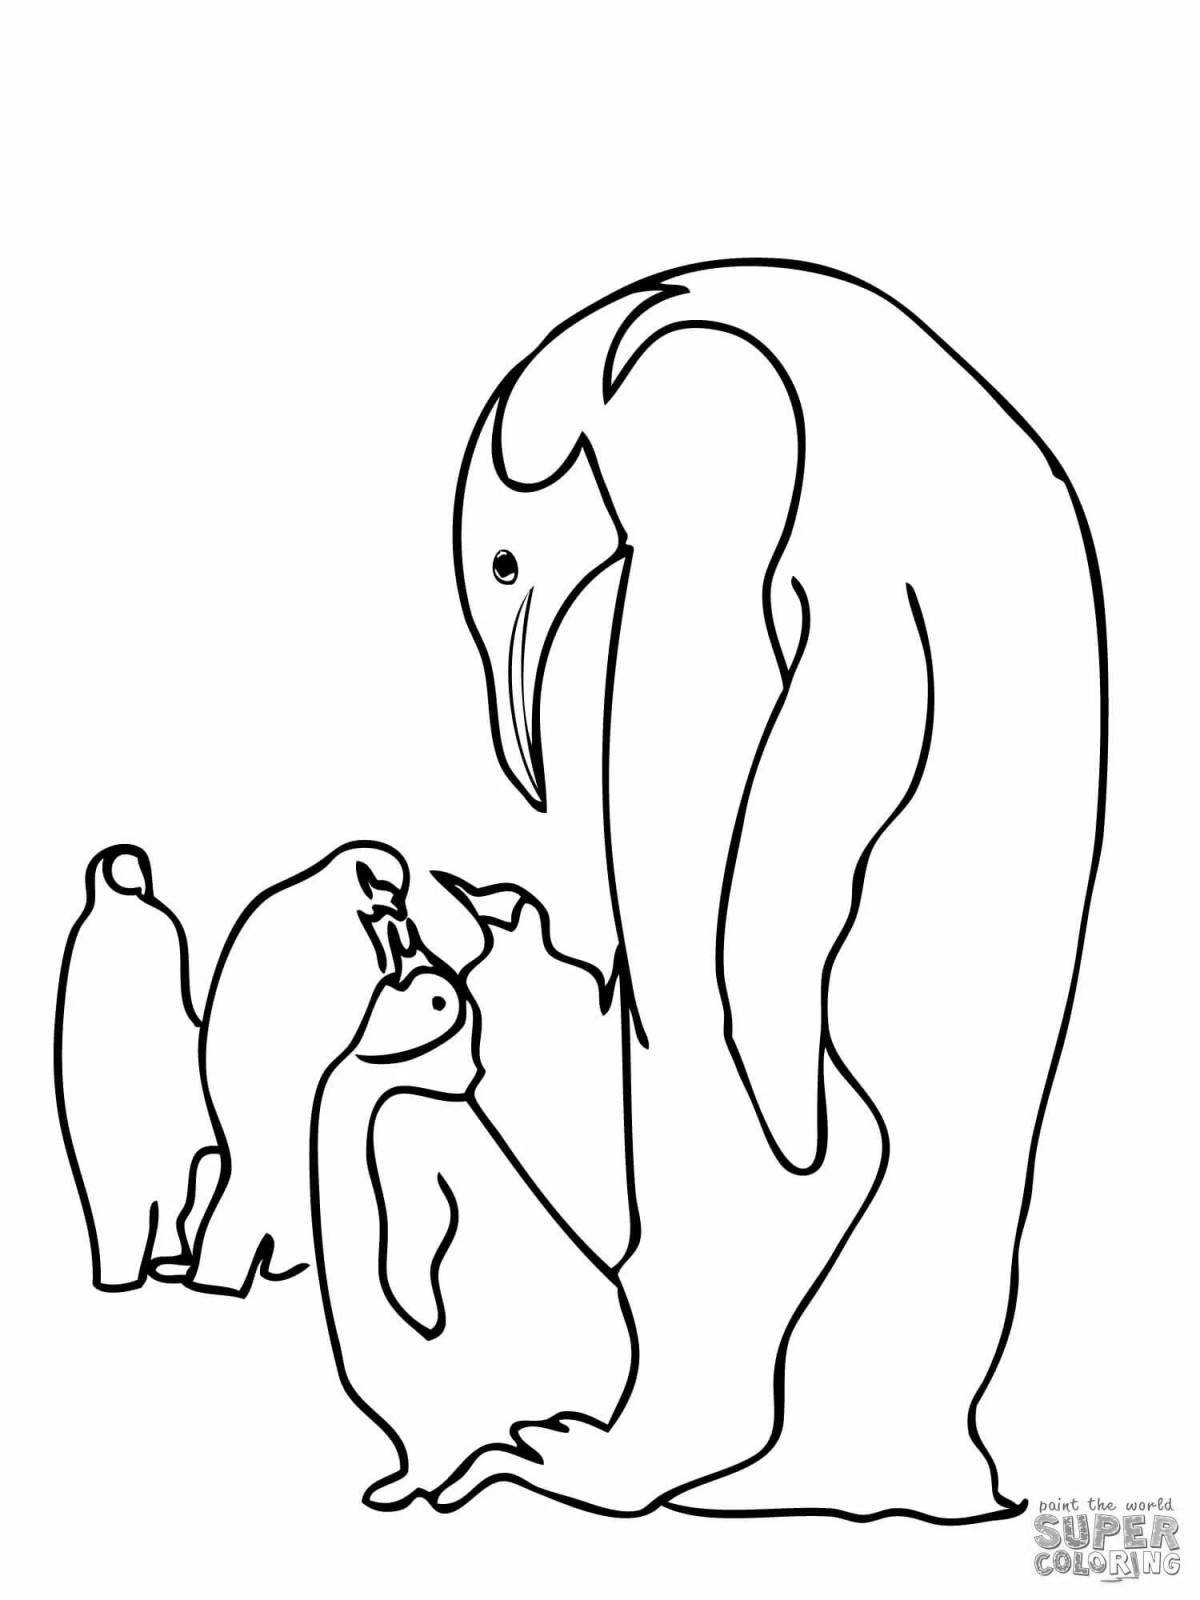 Rampant penguin family coloring page